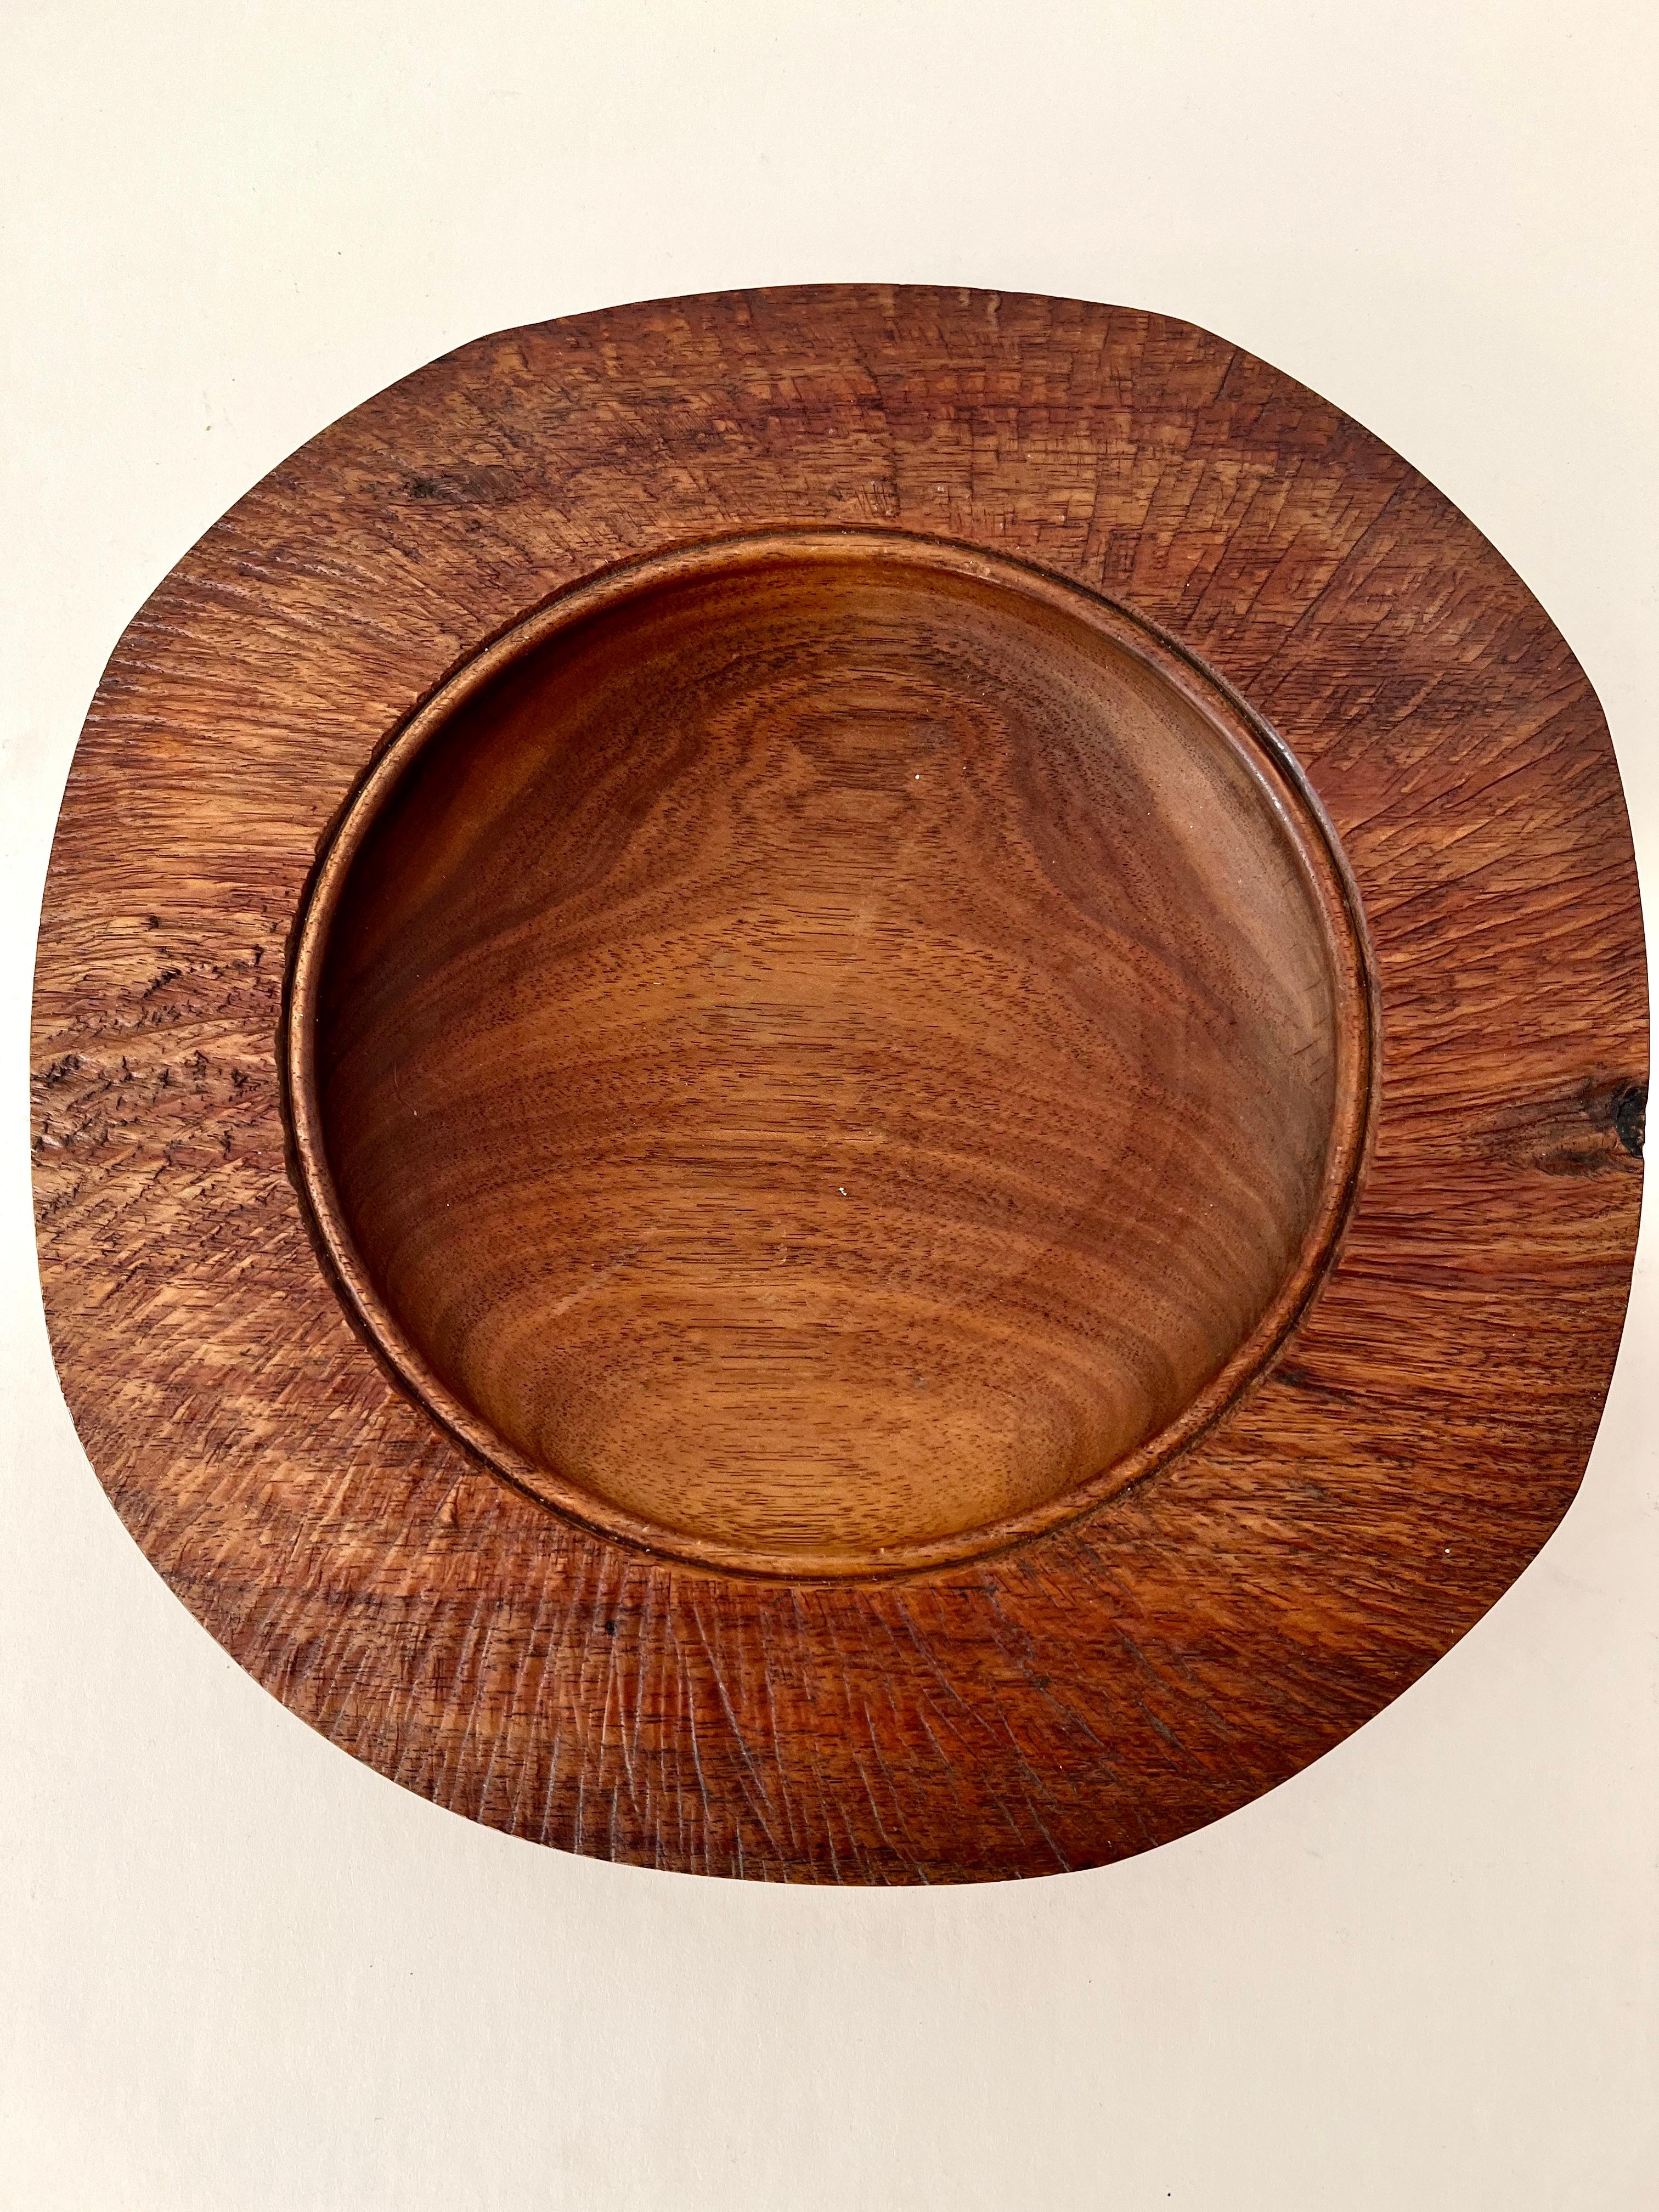 Hand-Crafted Signed Handmade New Zealand Blackwood Bowl with Rough Hewn Edges For Sale